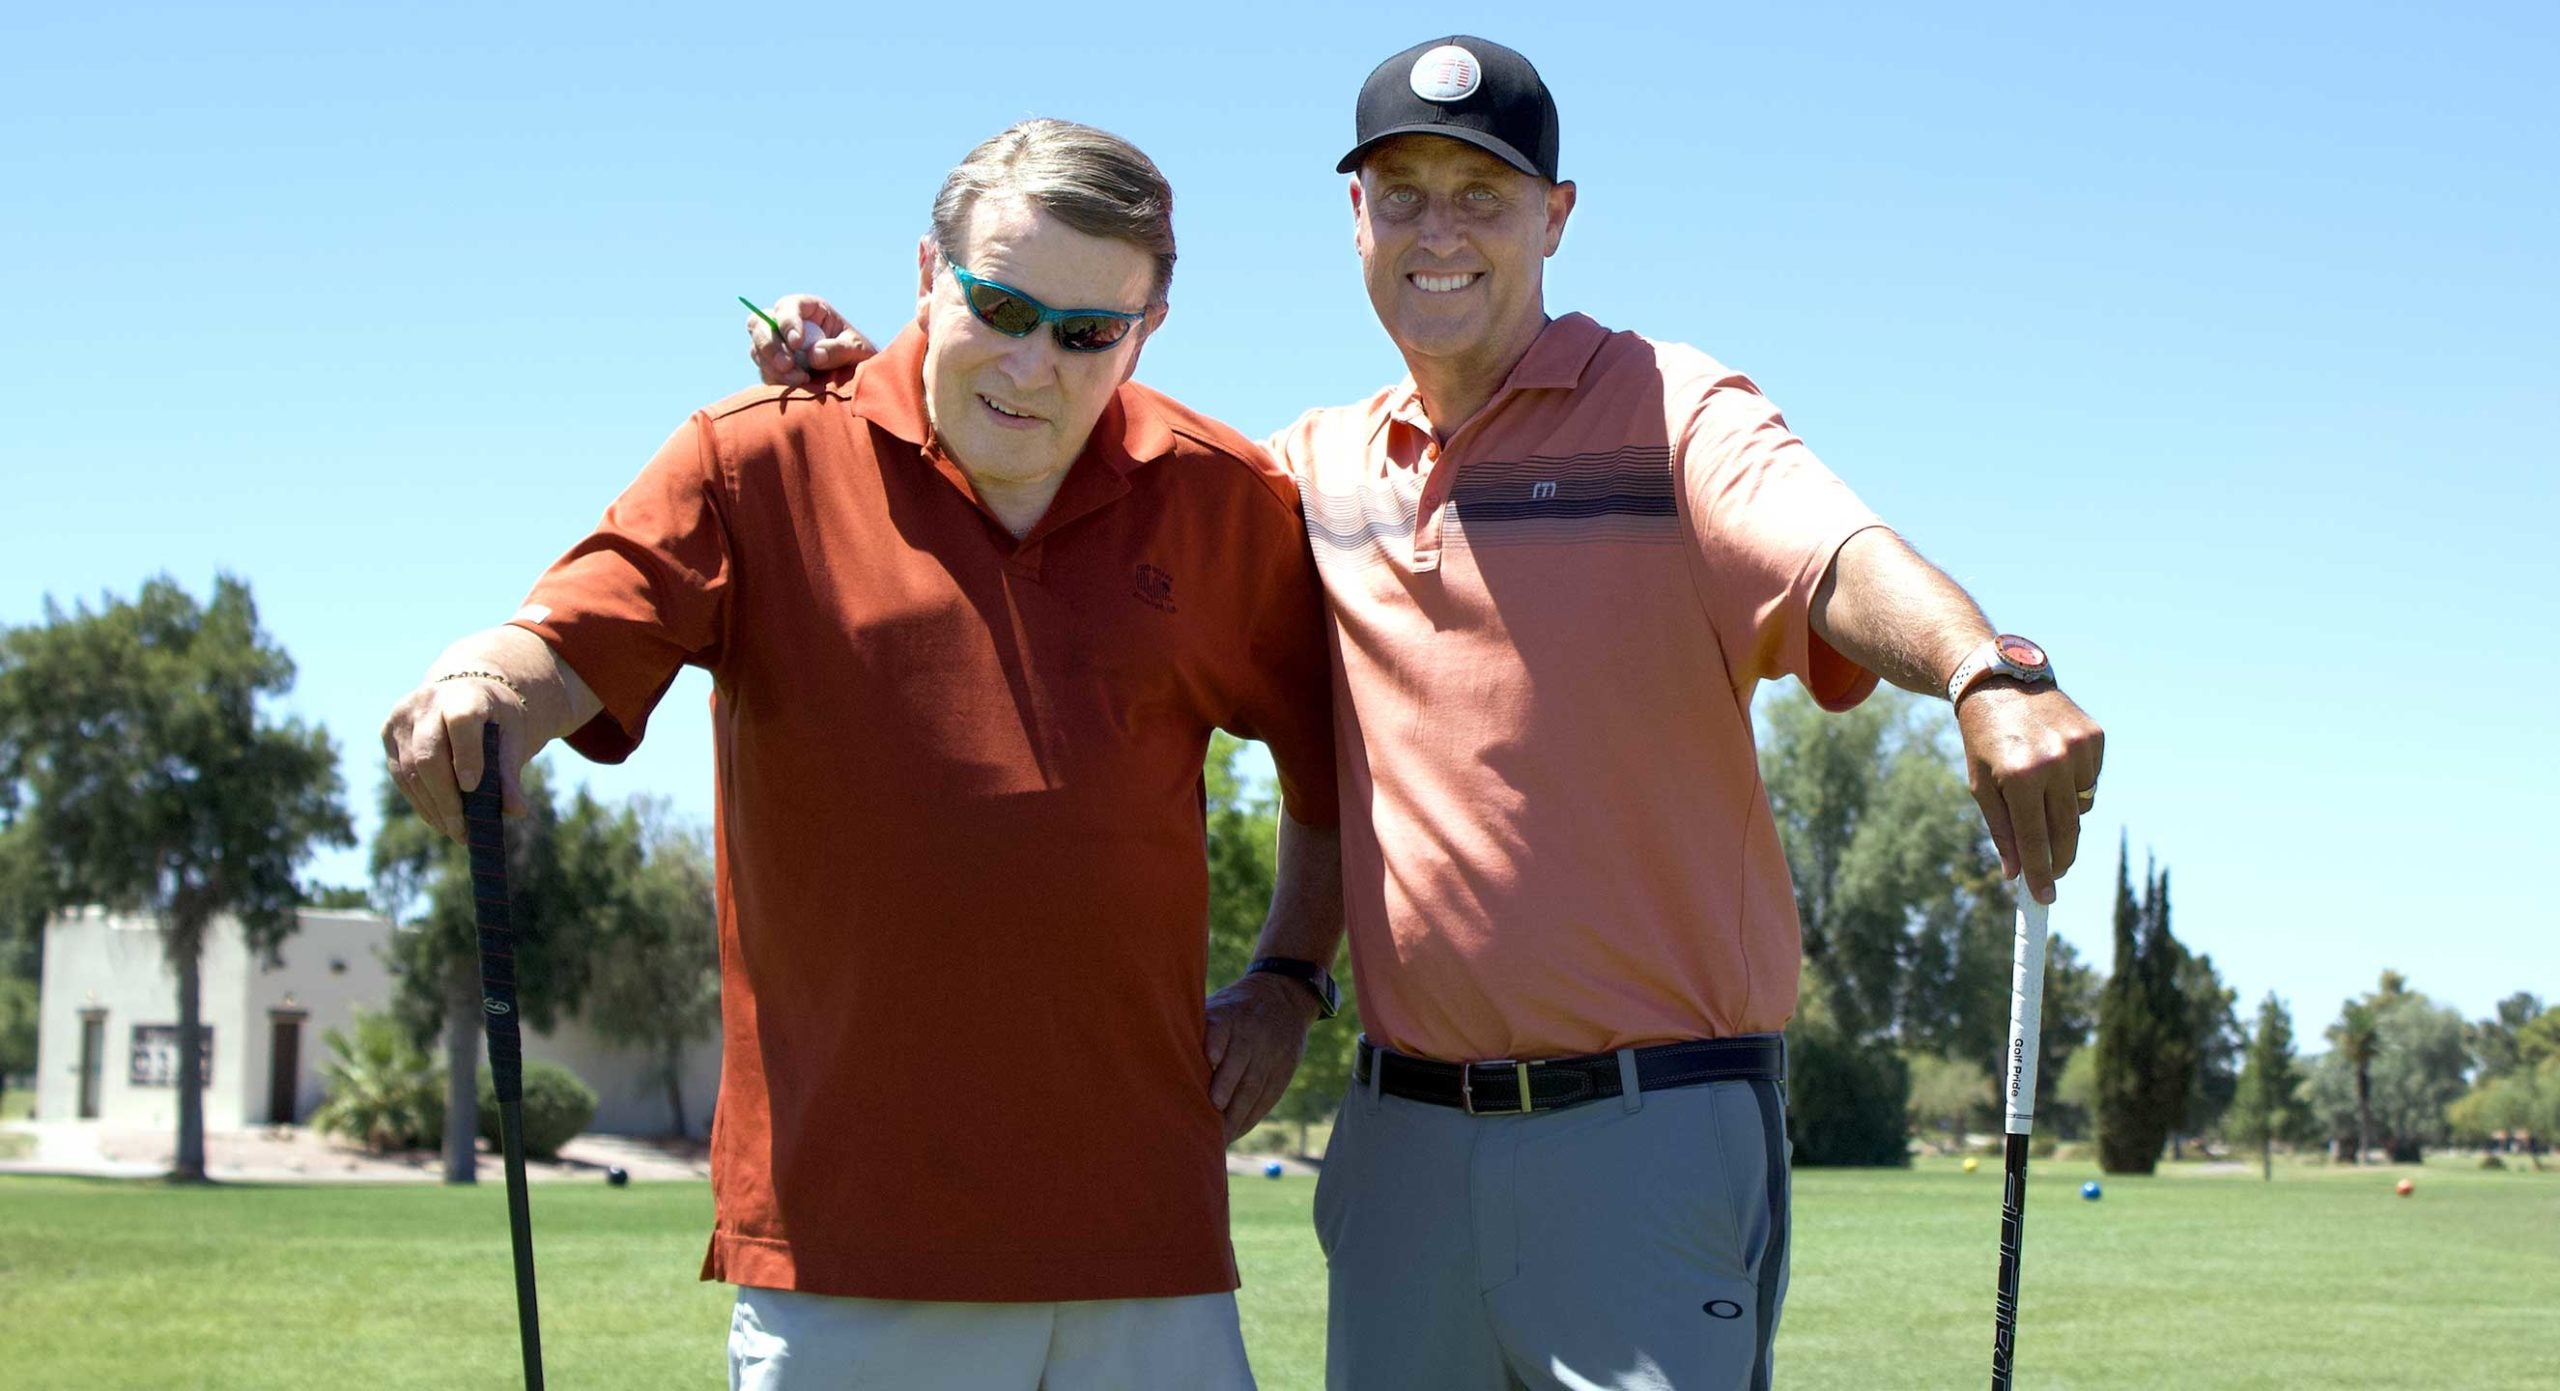 With the help of Steve Heller's golf-specific program, Mike Boze (left) finally returned to the golf course.